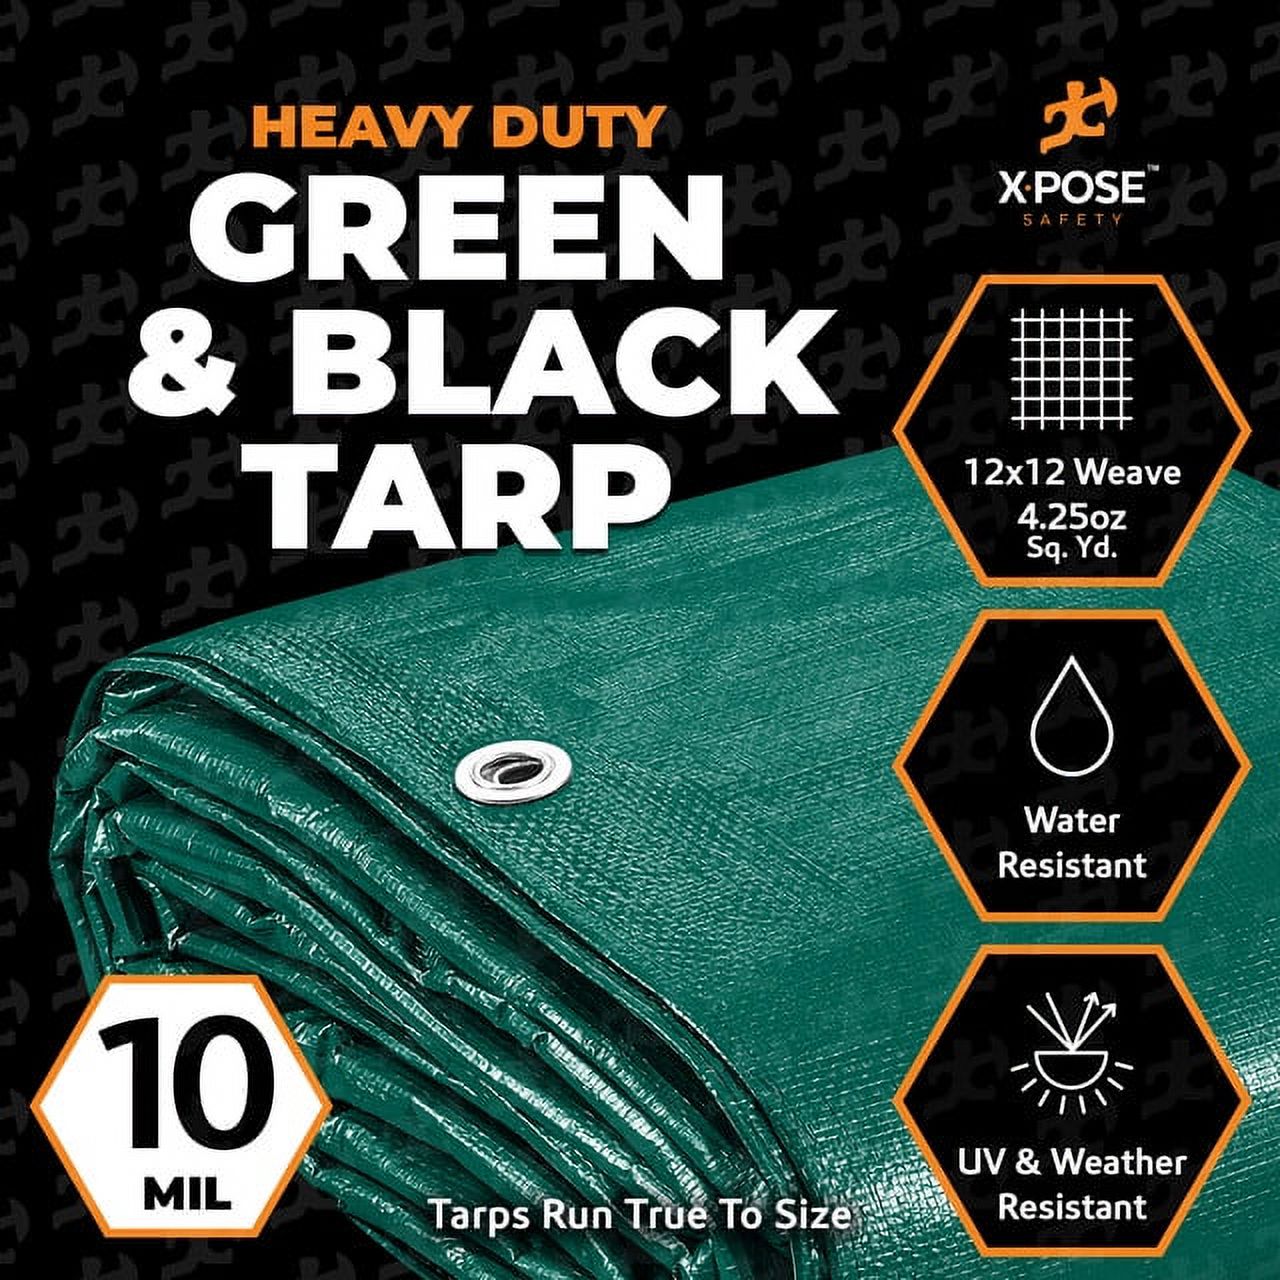 Heavy Duty Poly Tarp 12 Feet x 25 Feet 10 Mil Thick Waterproof, UV Blocking Protective Cover - Reversible Green and Black - Laminated Coating - Rustproof Grommets - by Xpose Safety - image 2 of 8